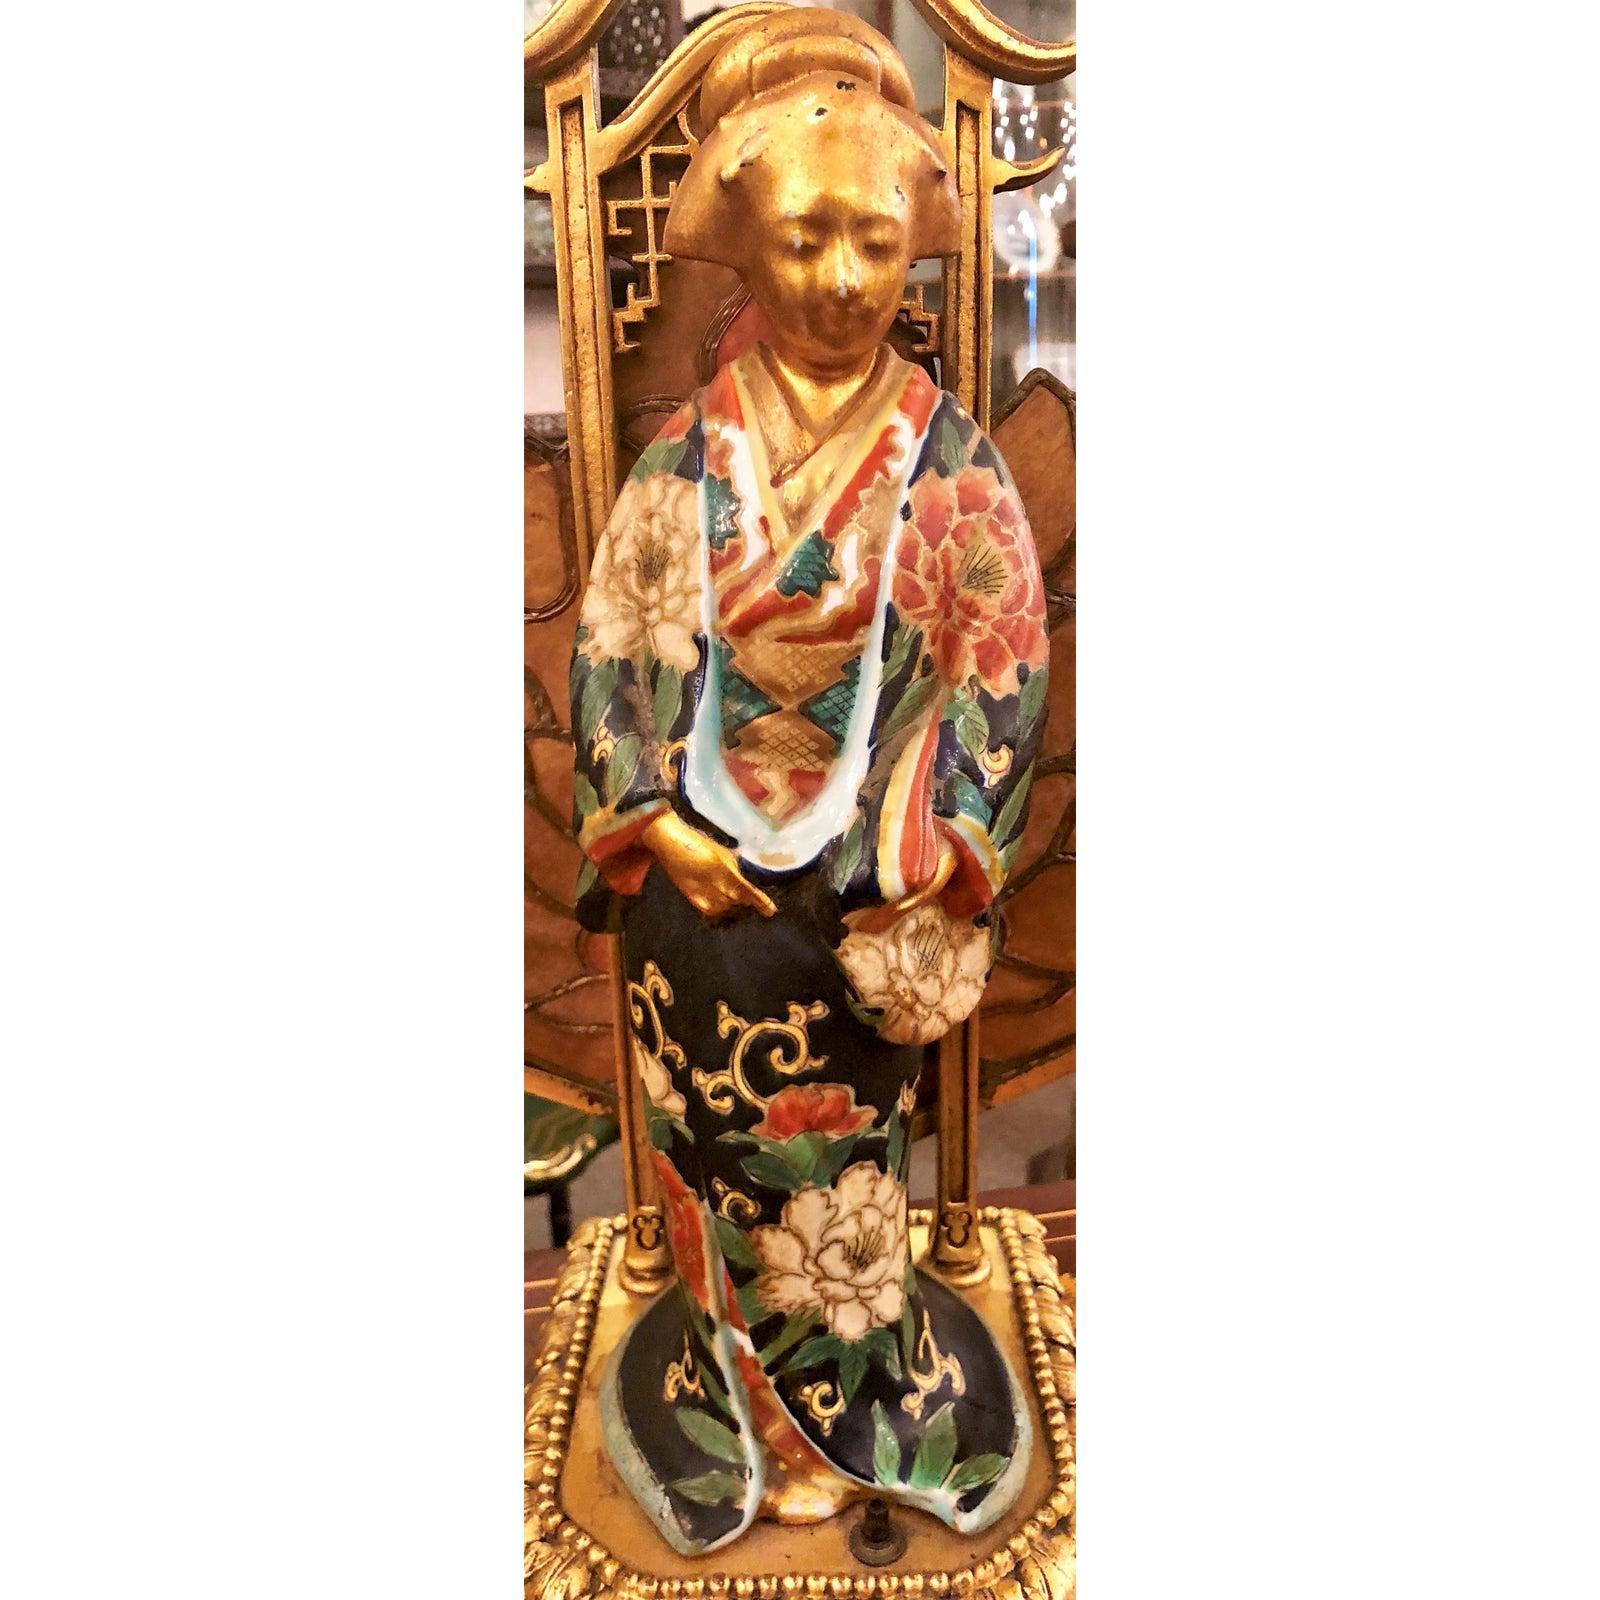 Kuan Yen figure with stained glass. This is a wonderful lamp!.